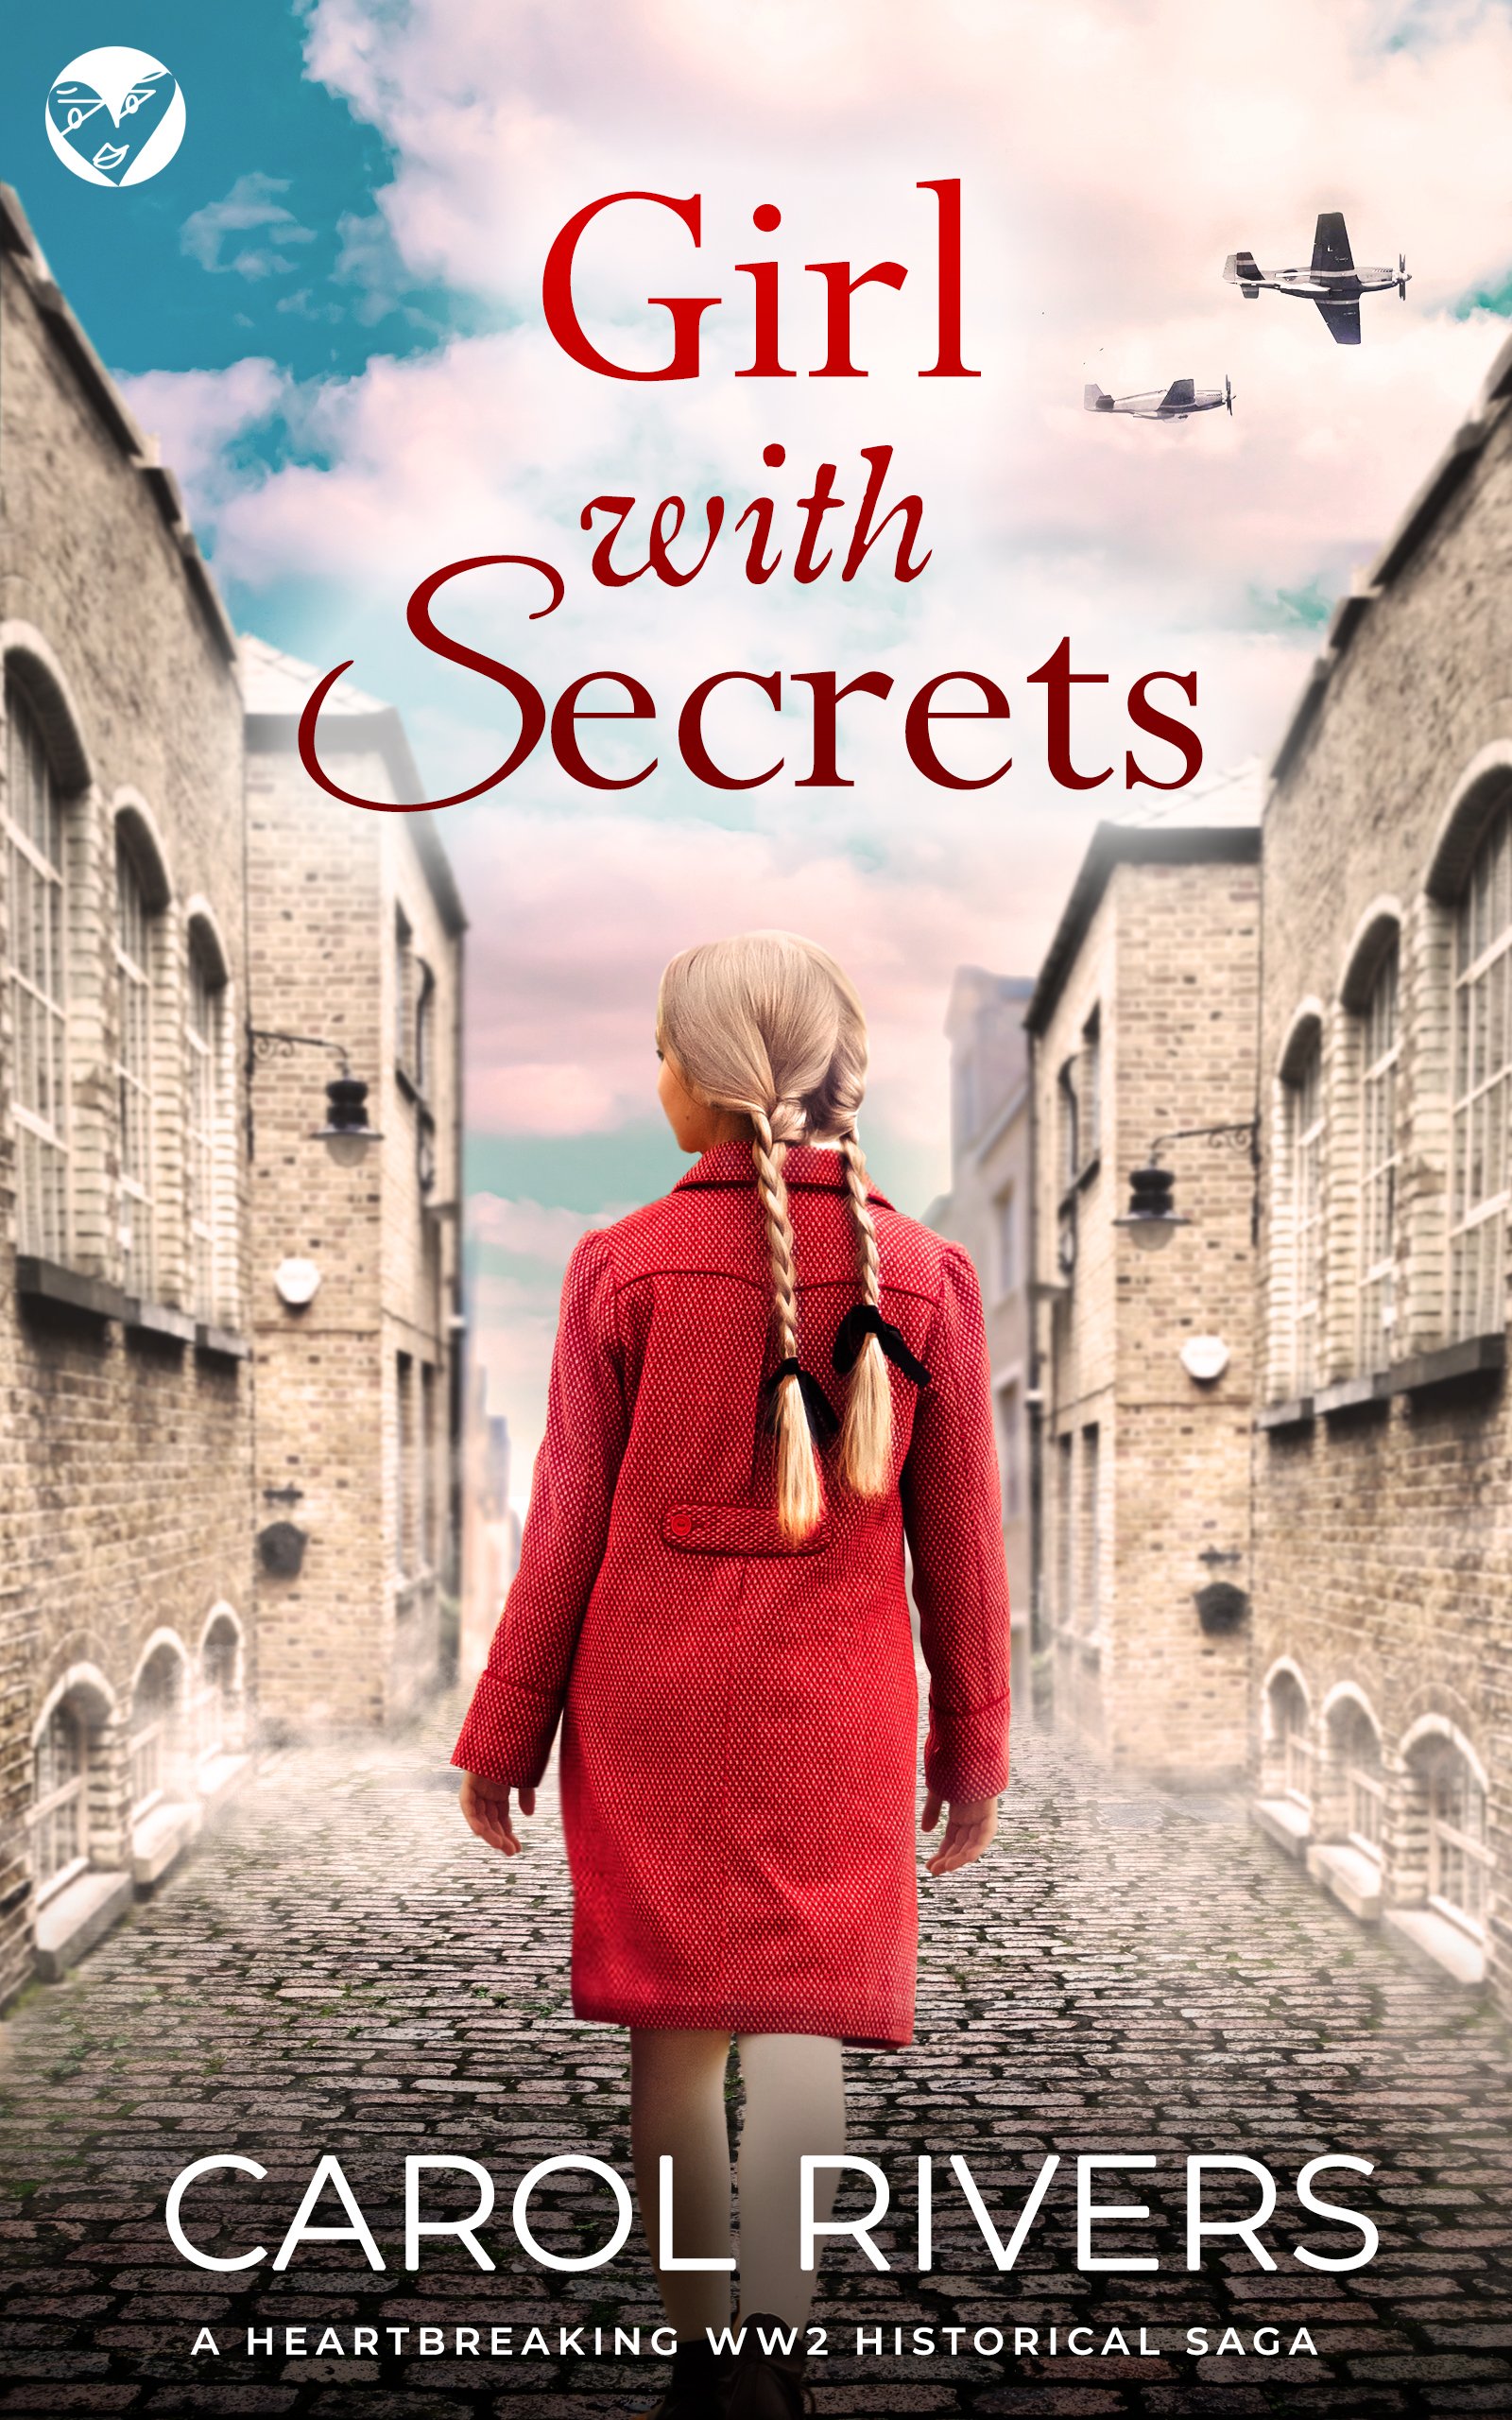 GIRL WITH SECRETS Cover publish.jpg